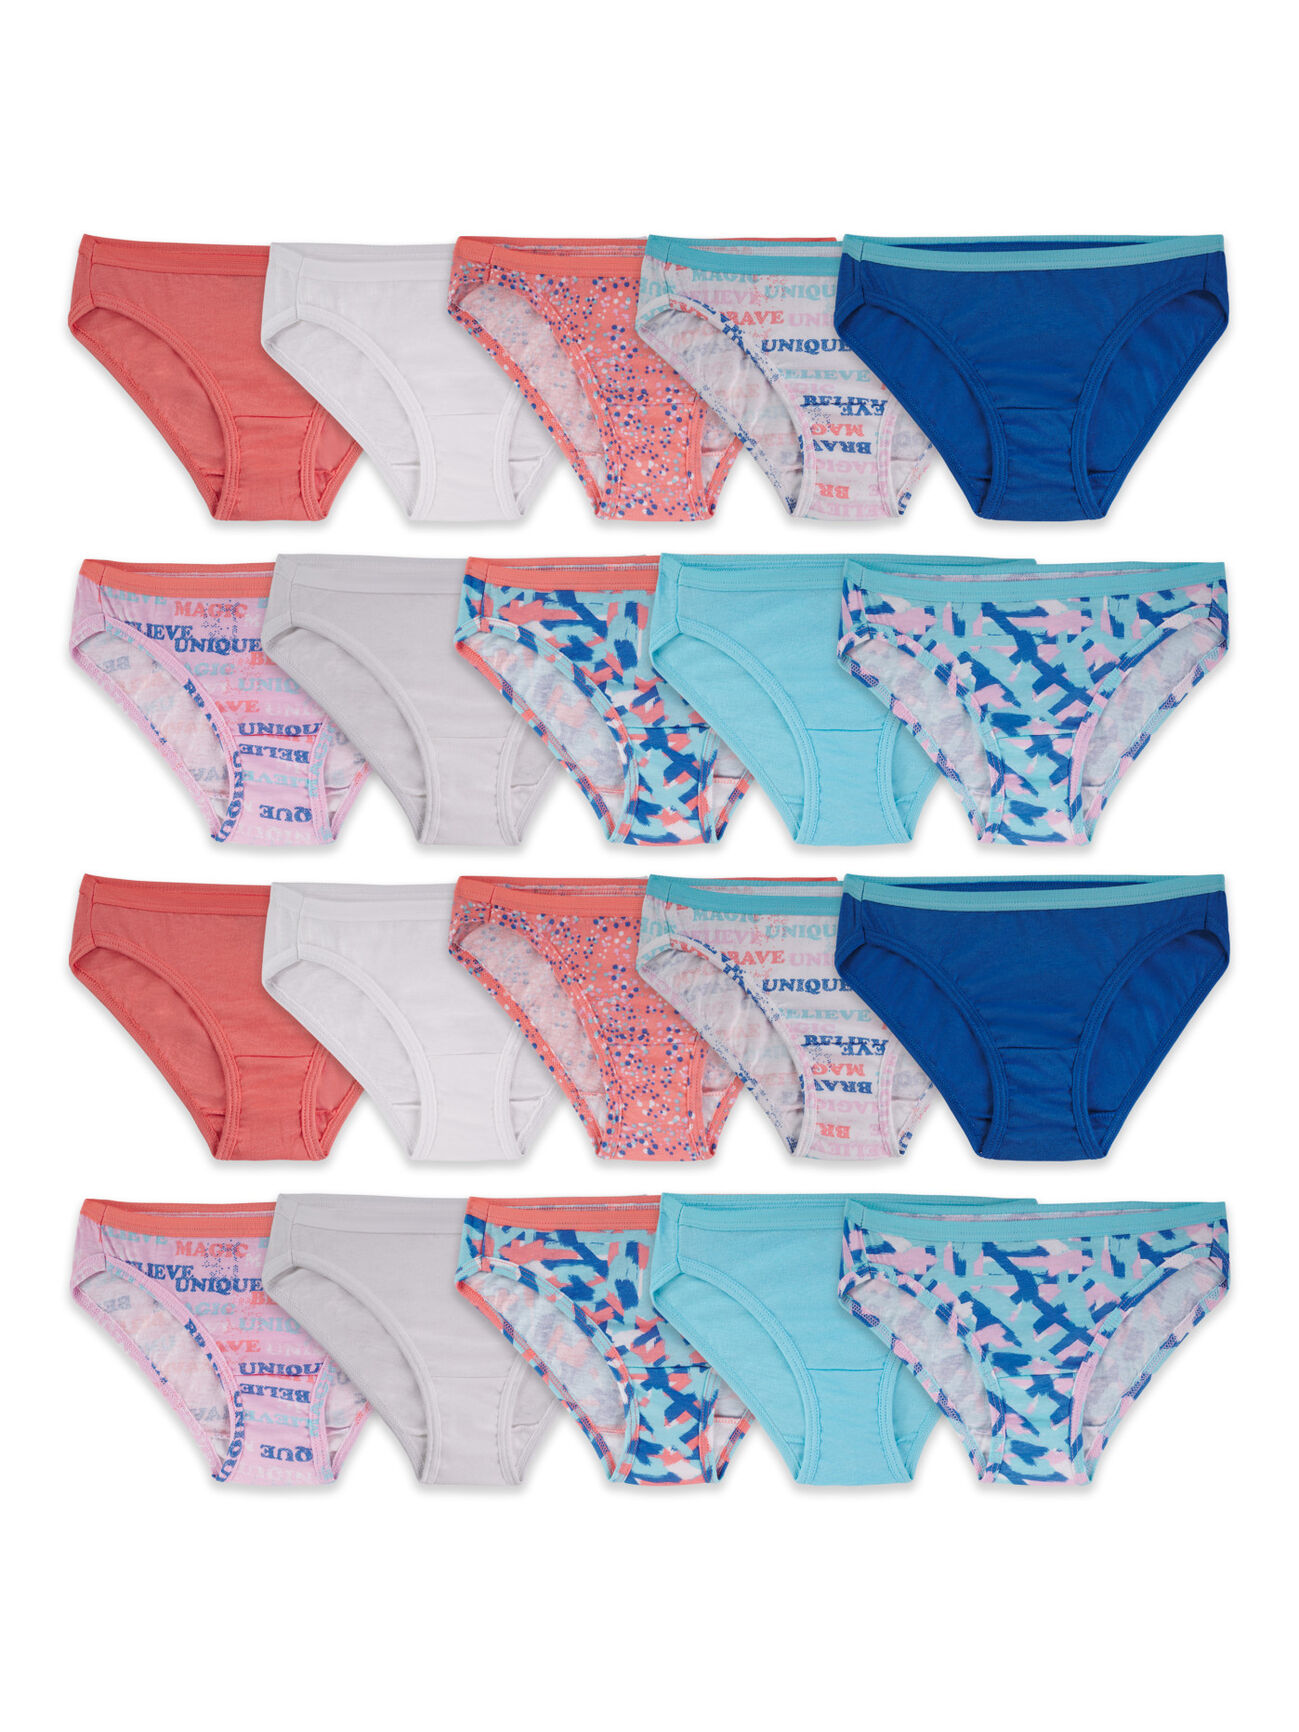 Fruit of the Loom womens Tag Free Cotton Panties bikini underwear, 5 Pack -  Assorted Colors, 5 at  Women's Clothing store